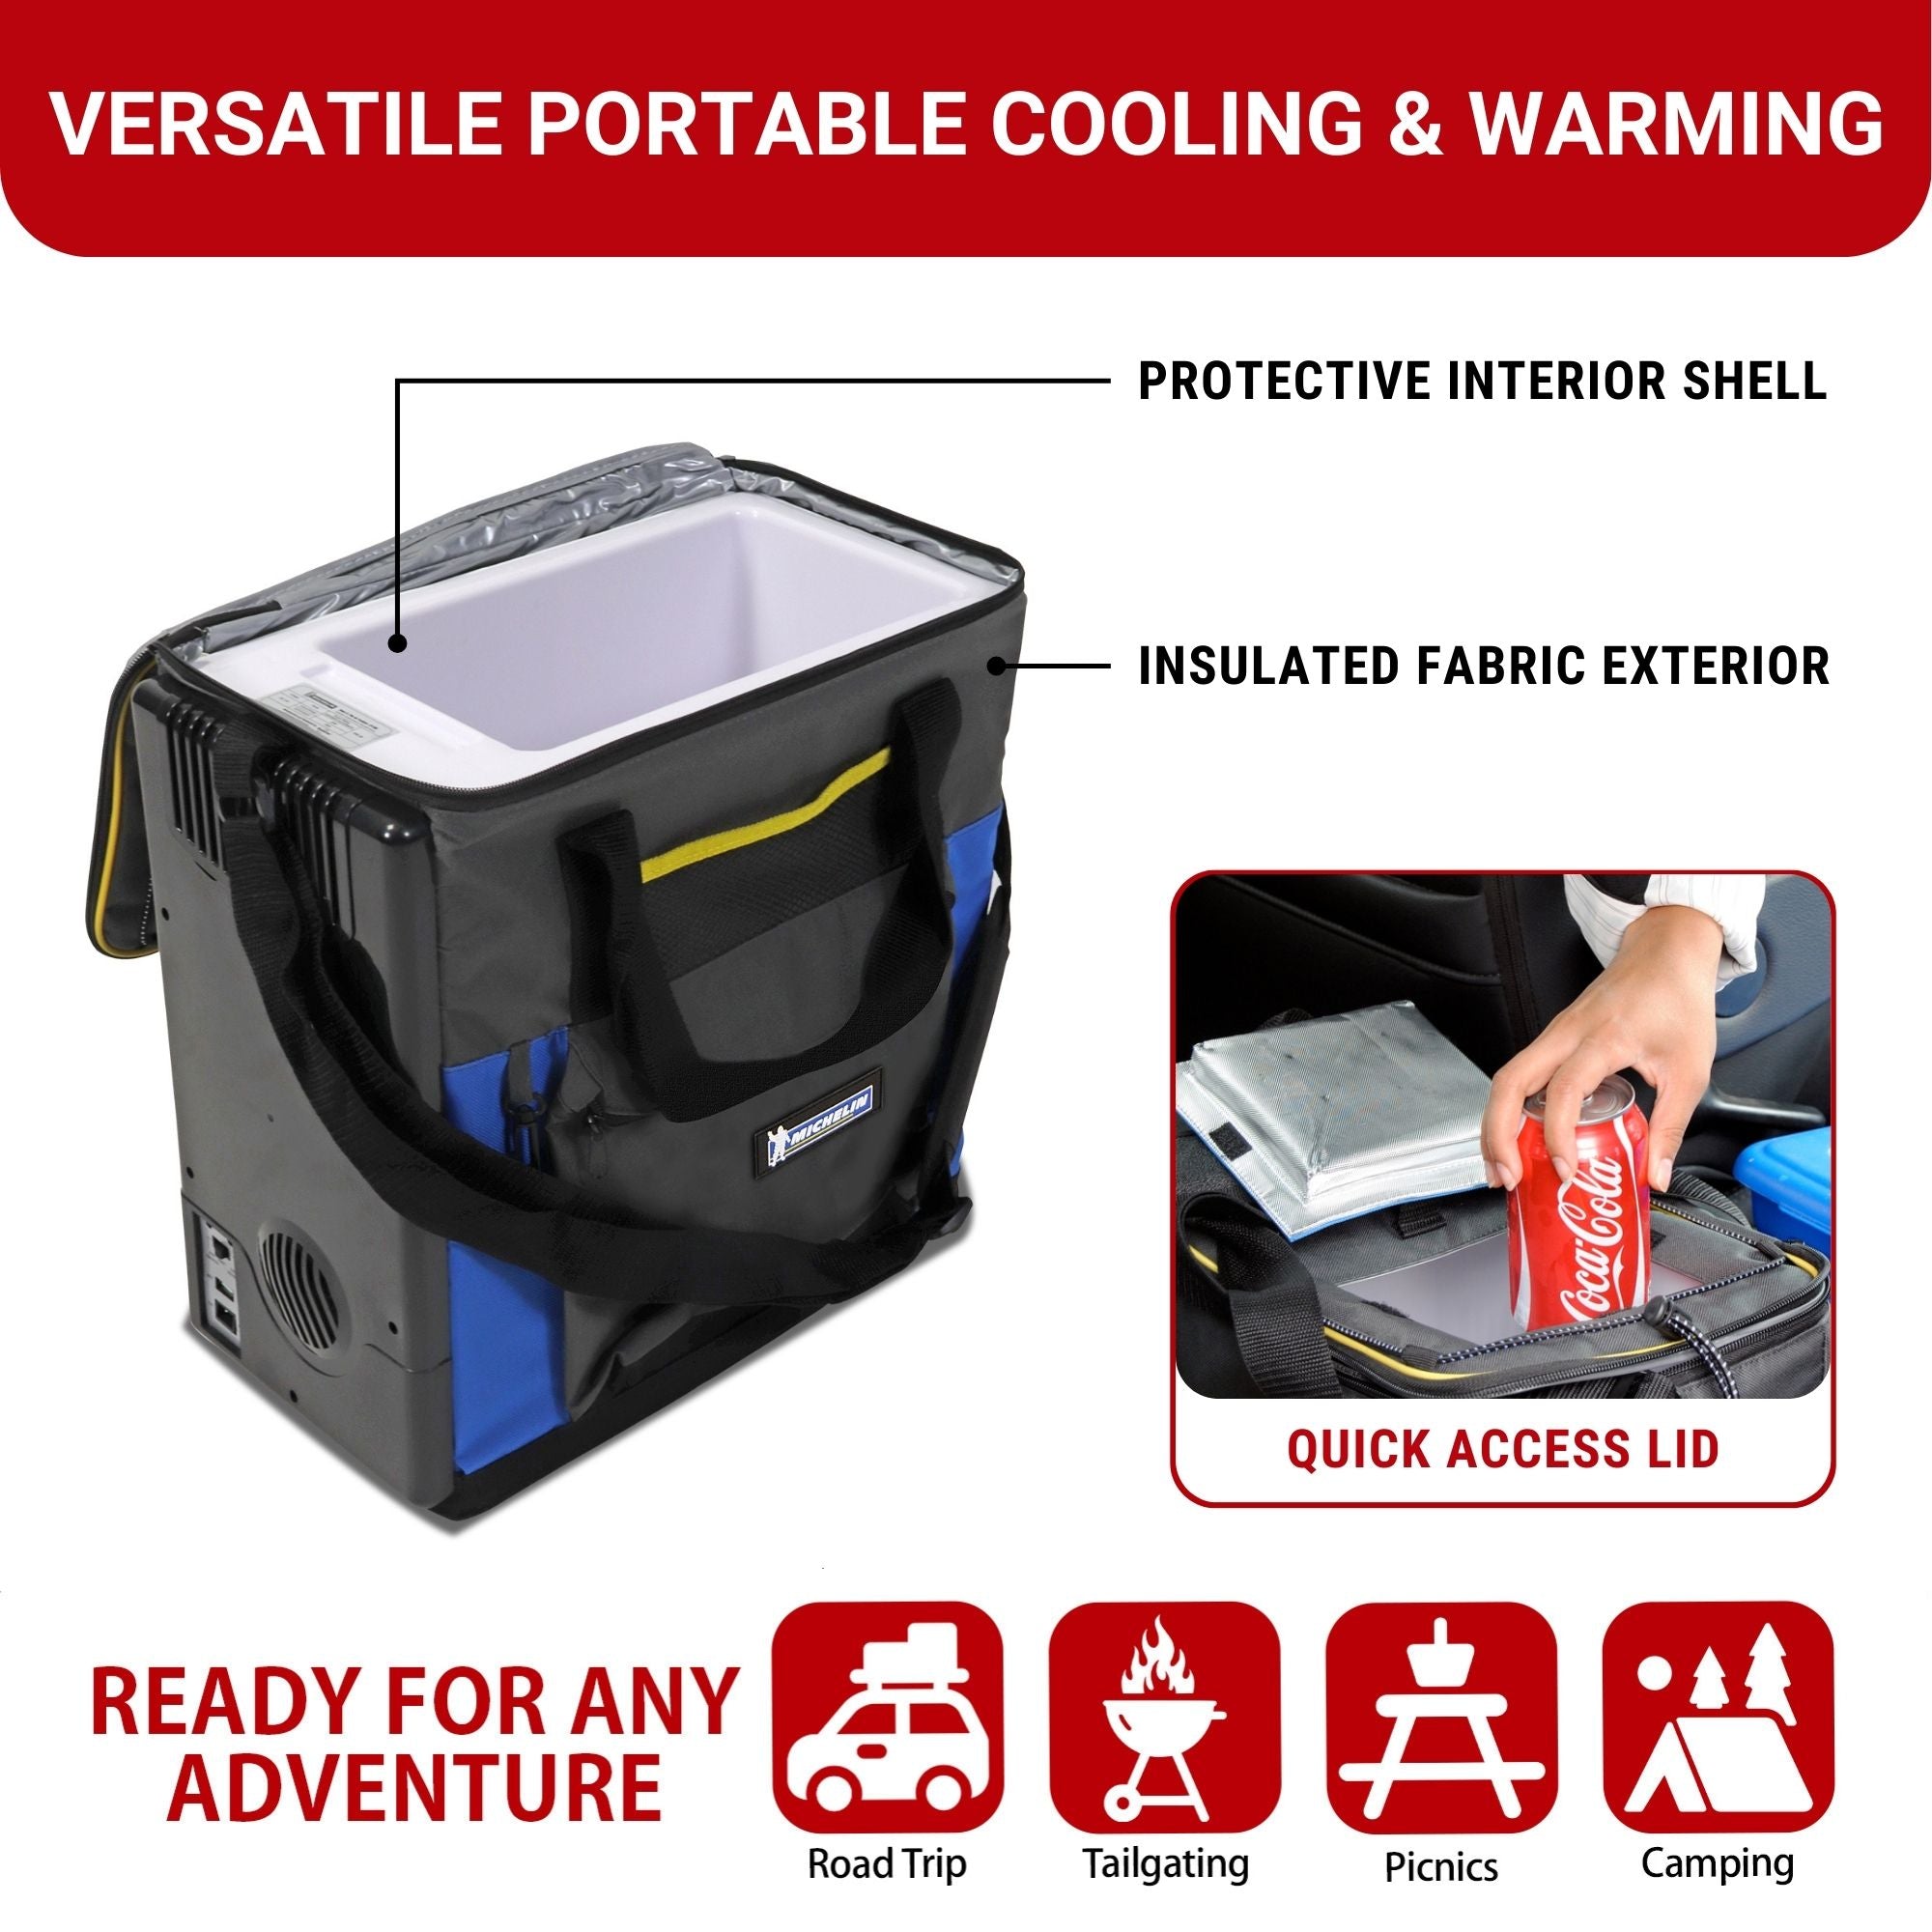 Michelin 12V cooler/warmer, open, with labels indicating the, "protective interior shell," and, "insulated fabric exterior," and an inset image to the right showing a closeup of a person's hand taking a can of soda from the quick access lid. Text above reads, "VERSATILE ICELESS COOLING & WARMING." Text below reads, "READY FOR ANY ADVENTURE" followed by icons labeled: Road trip, tailgating, picnics, and camping."